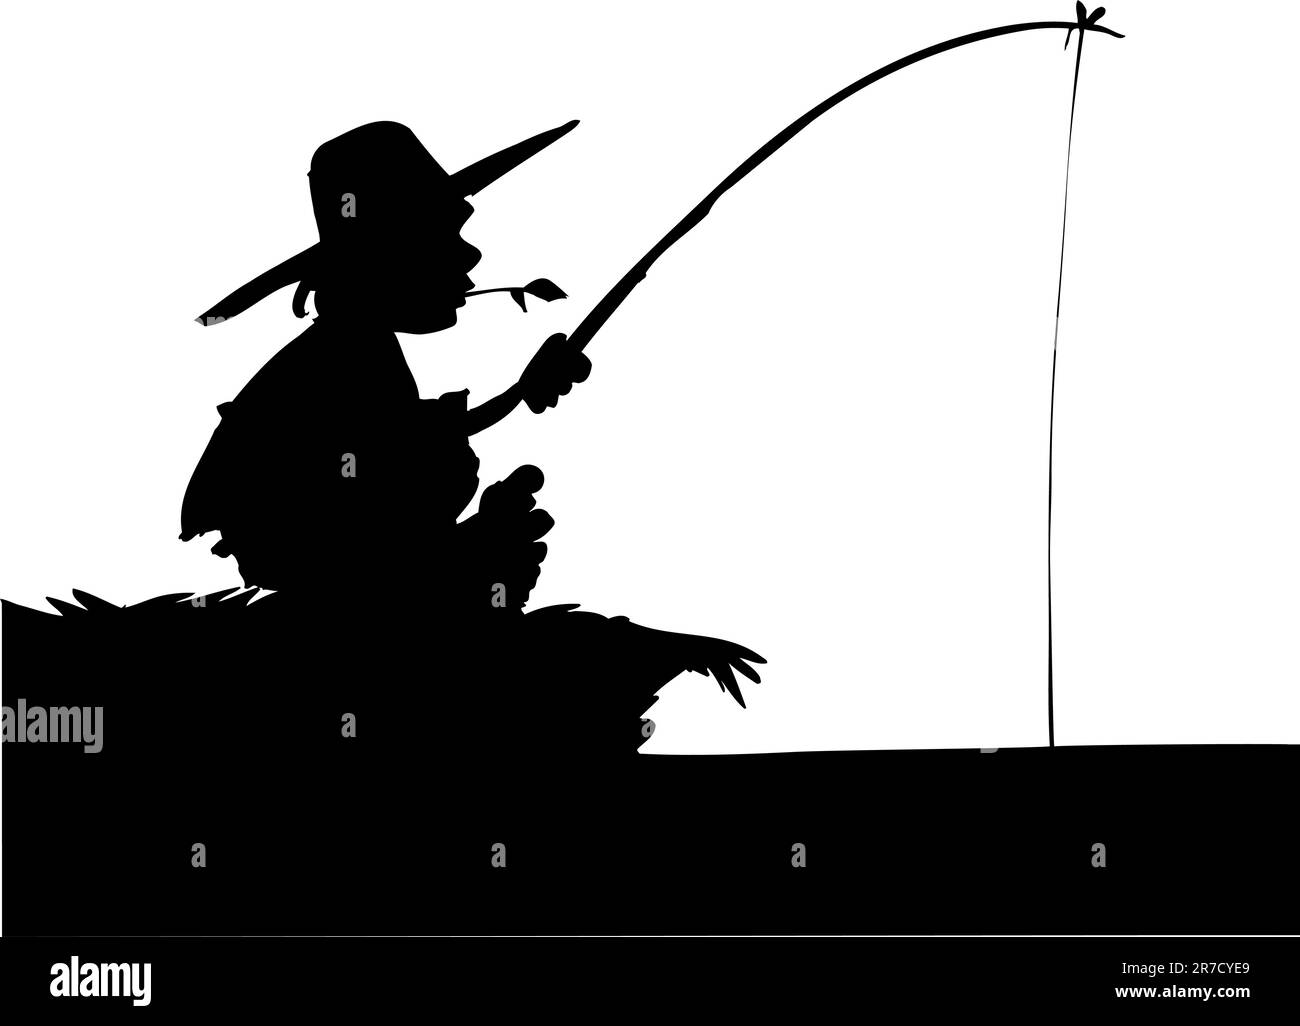 Silhouette of boy fishing. Isolated on white Stock Vector